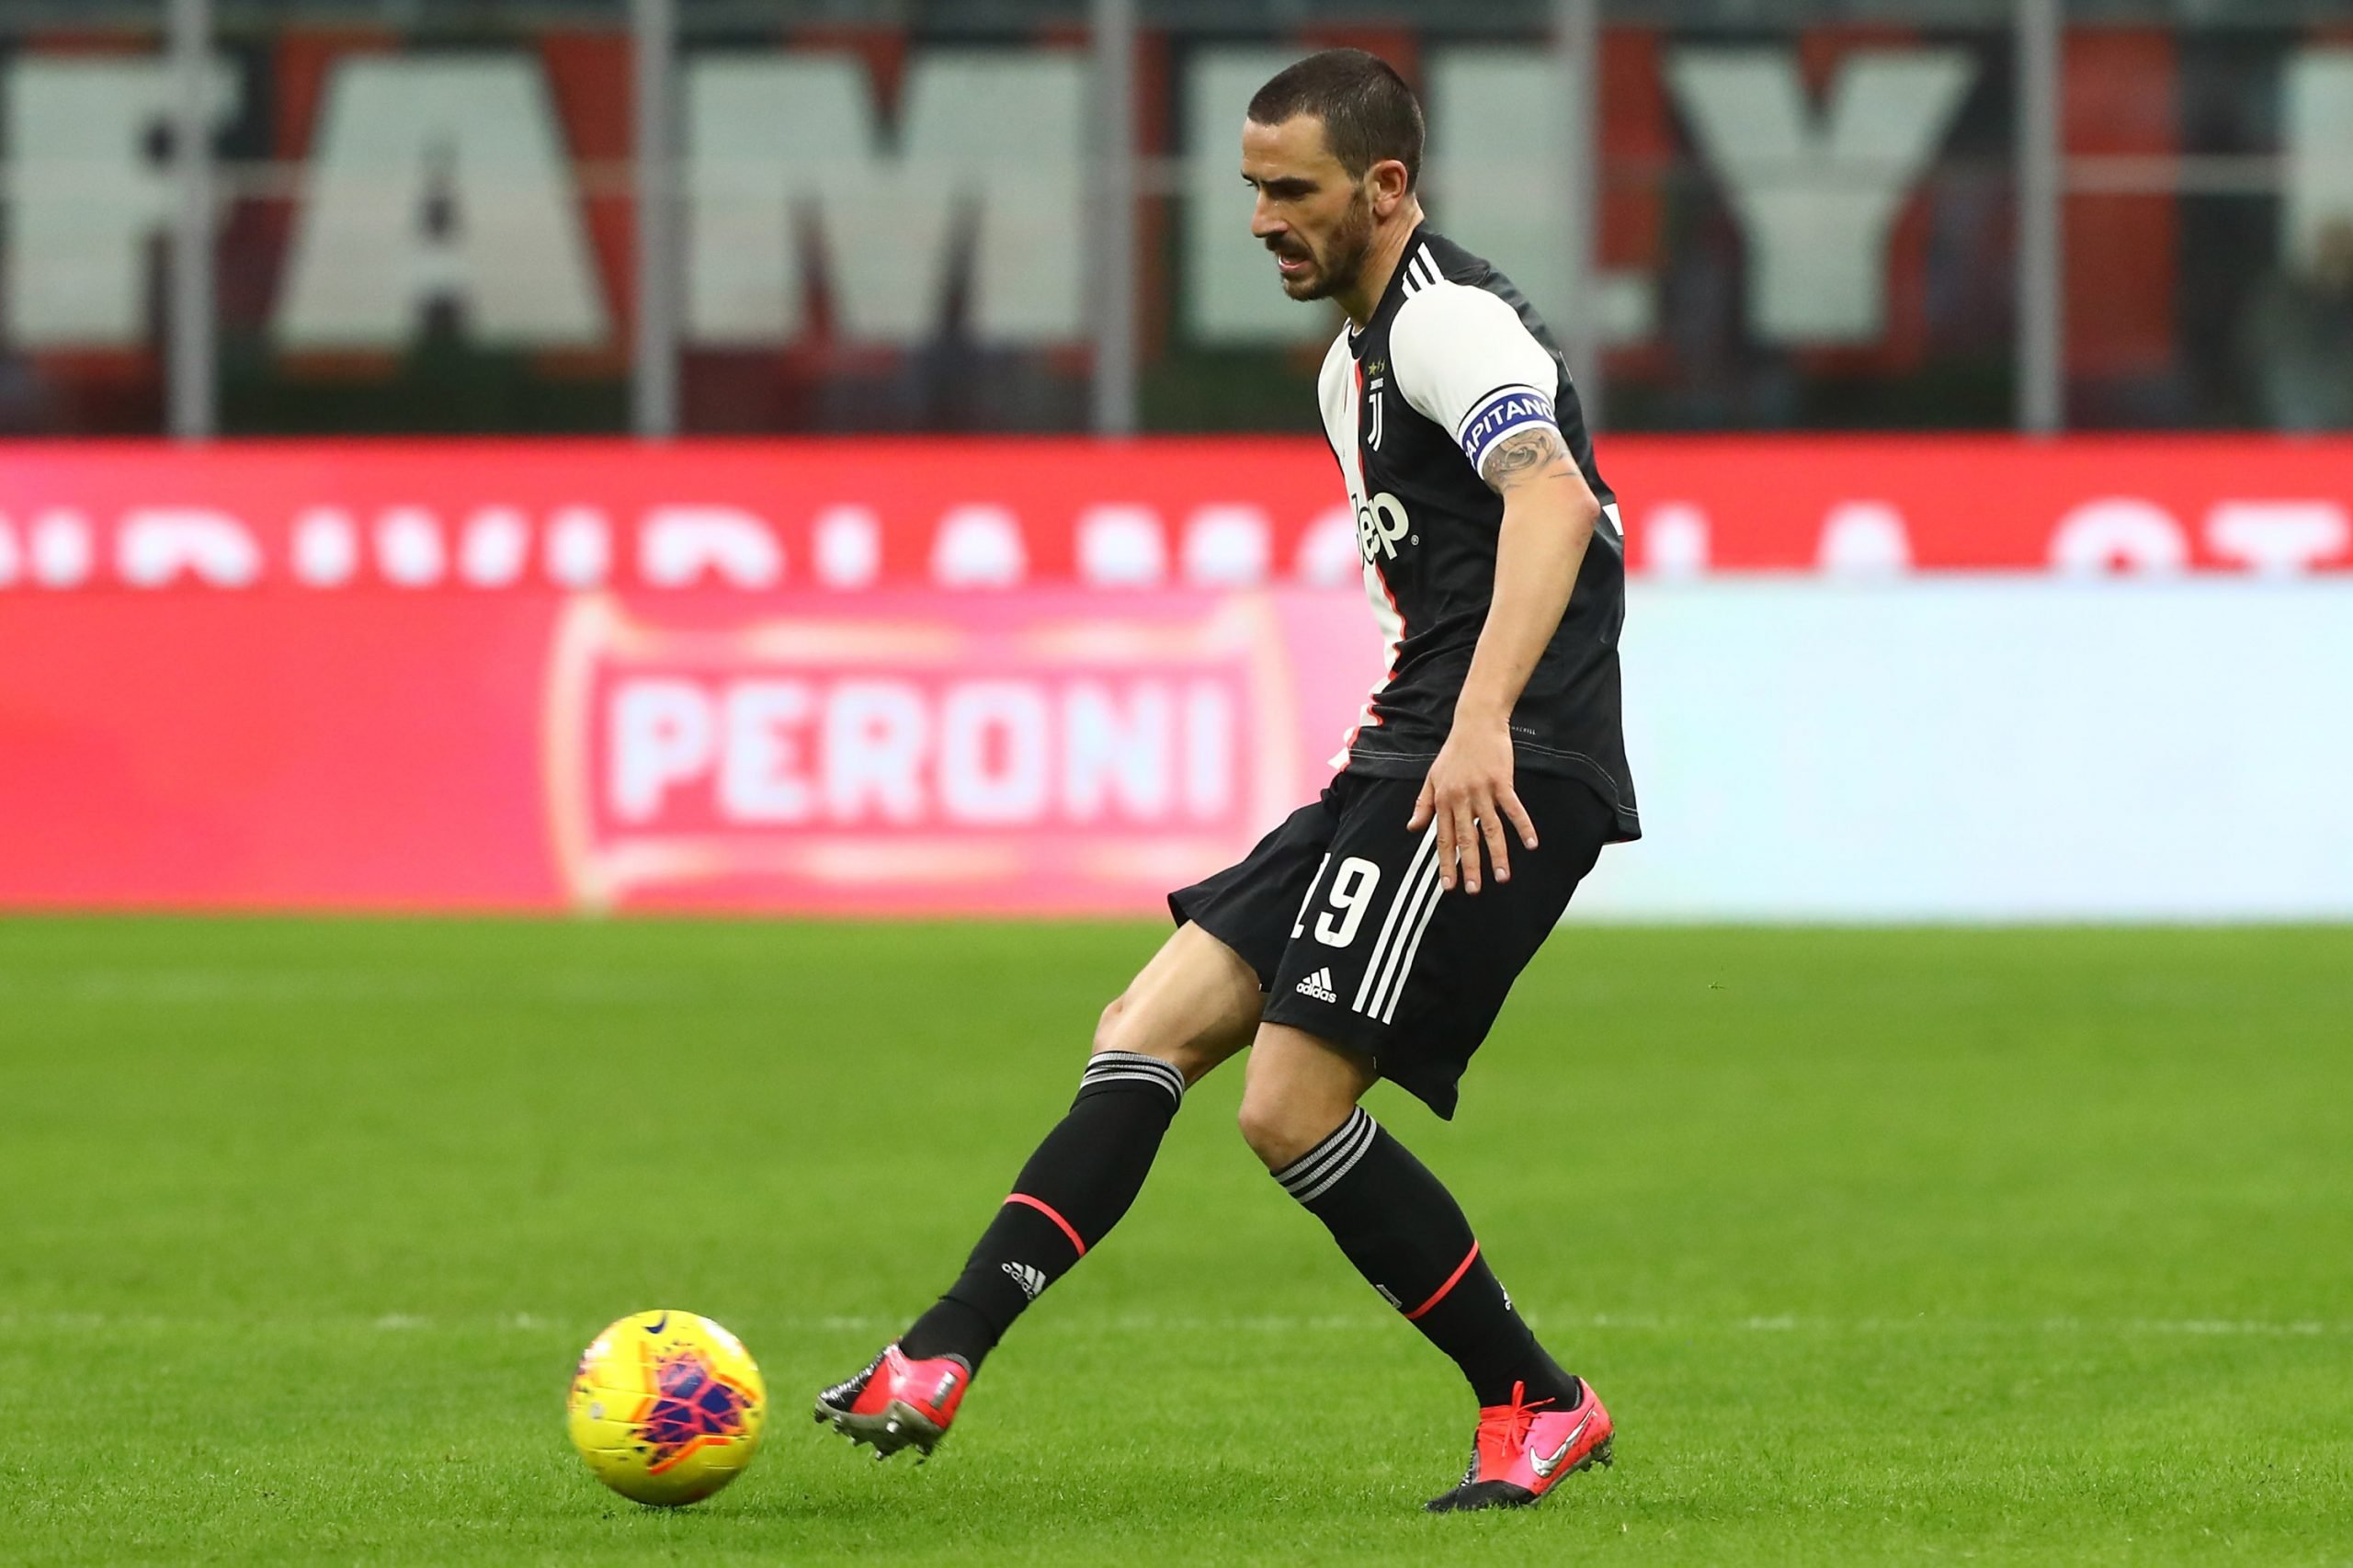 Manchester City eyeing a move for Leonardo Bonucci who is in action in the photo